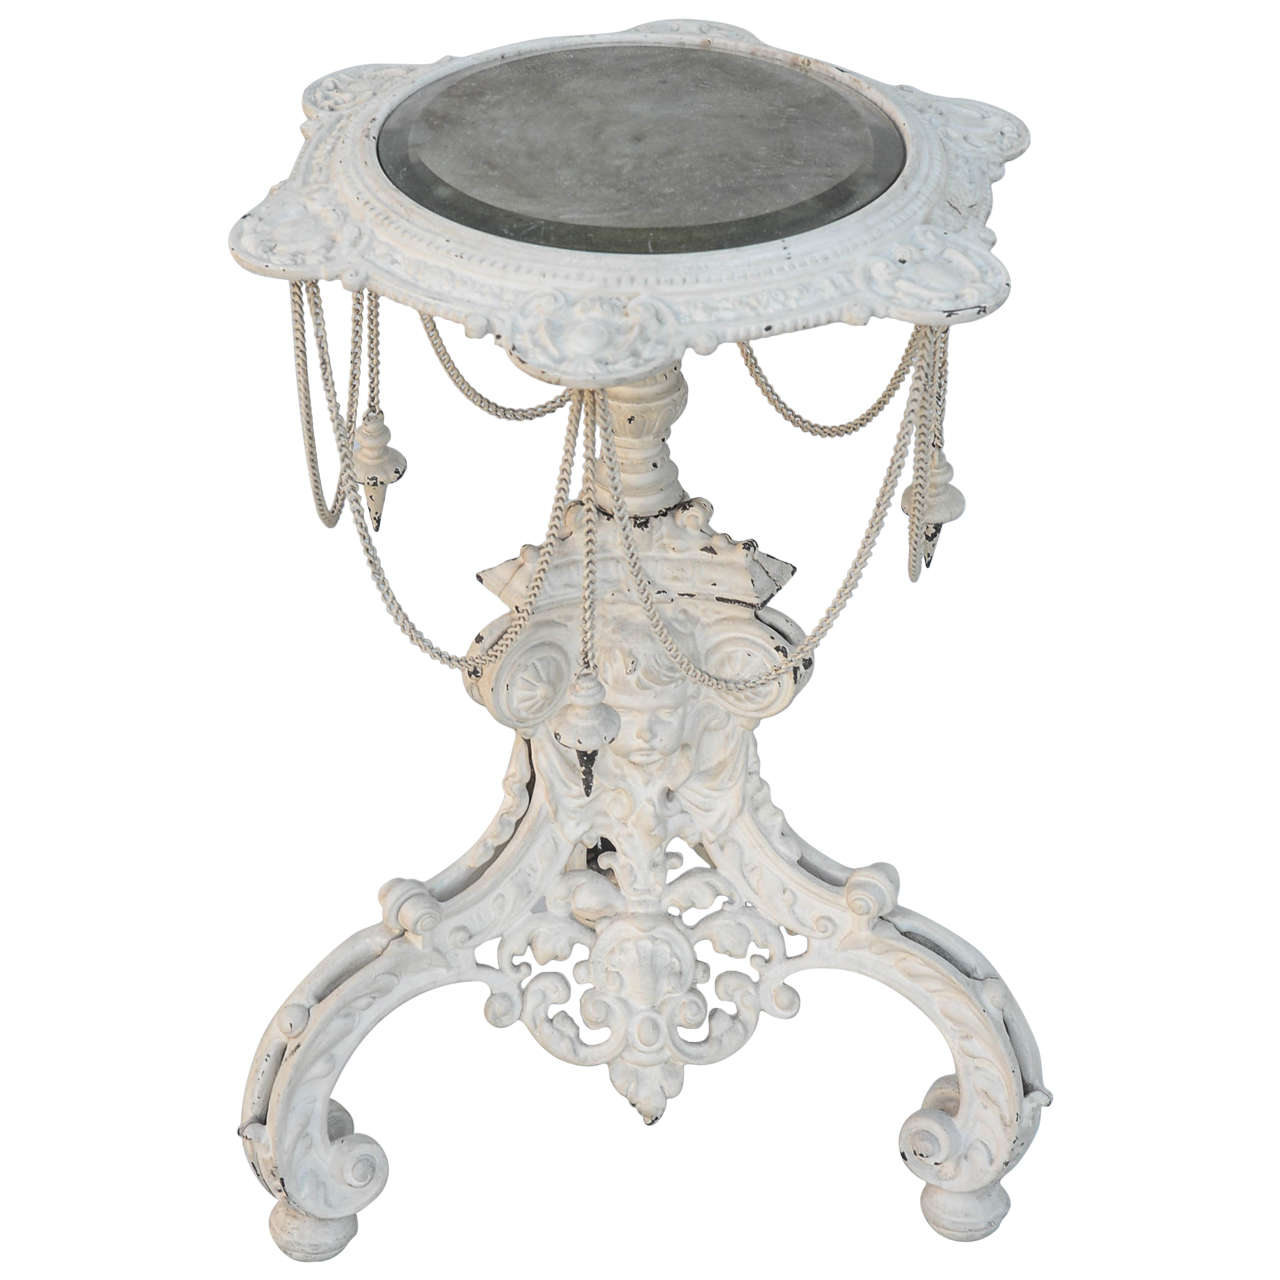 Wrought Iron Pedestal or Stand